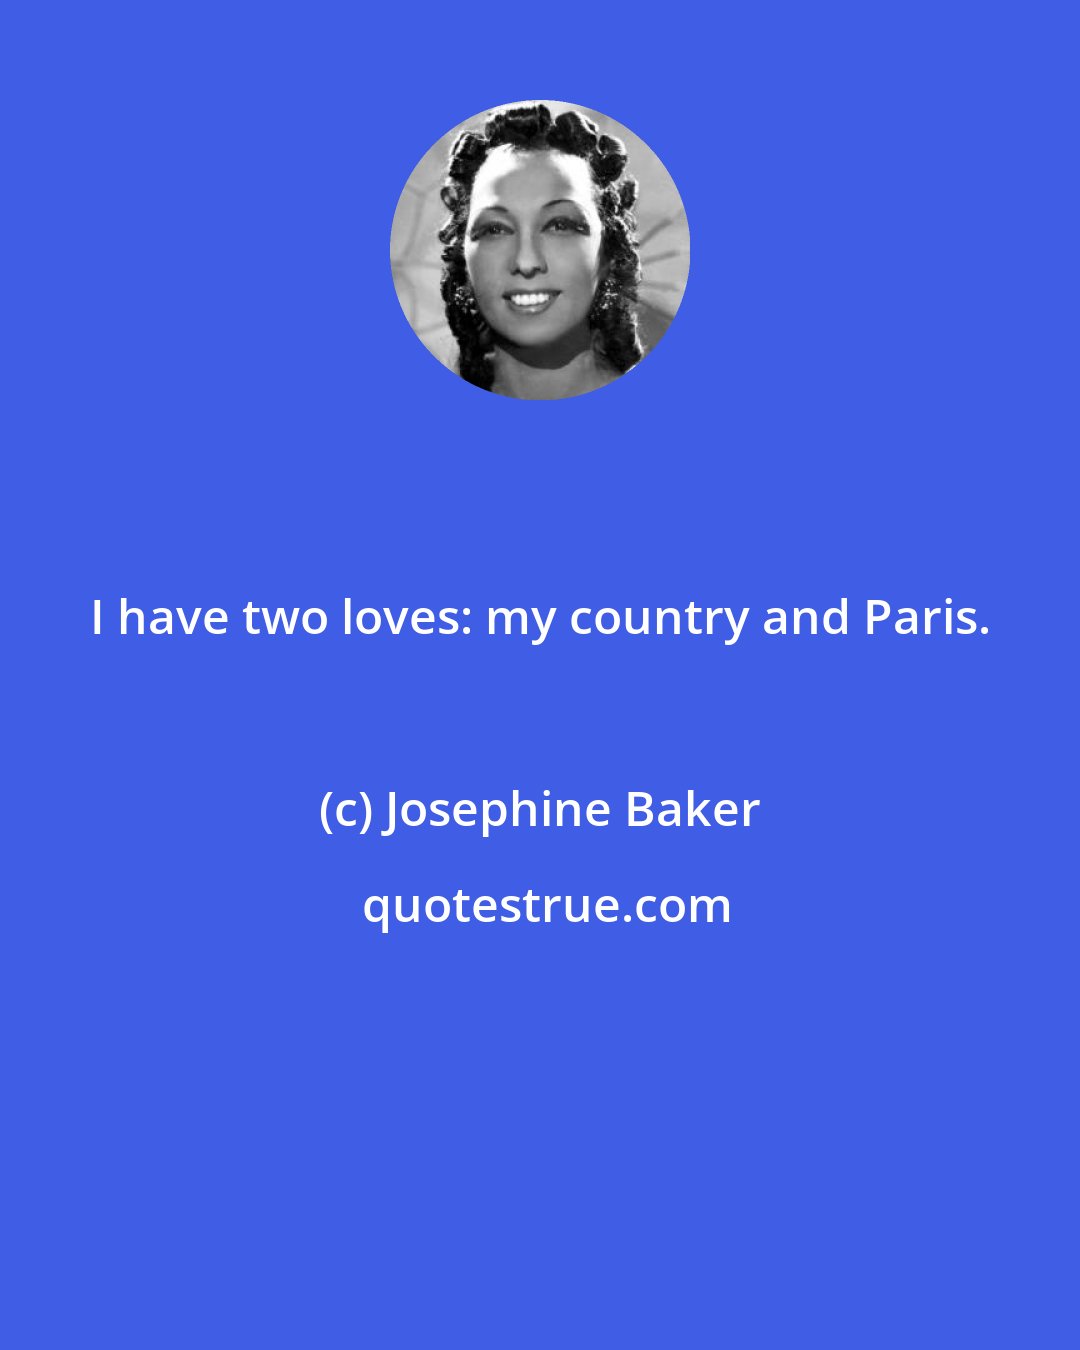 Josephine Baker: I have two loves: my country and Paris.